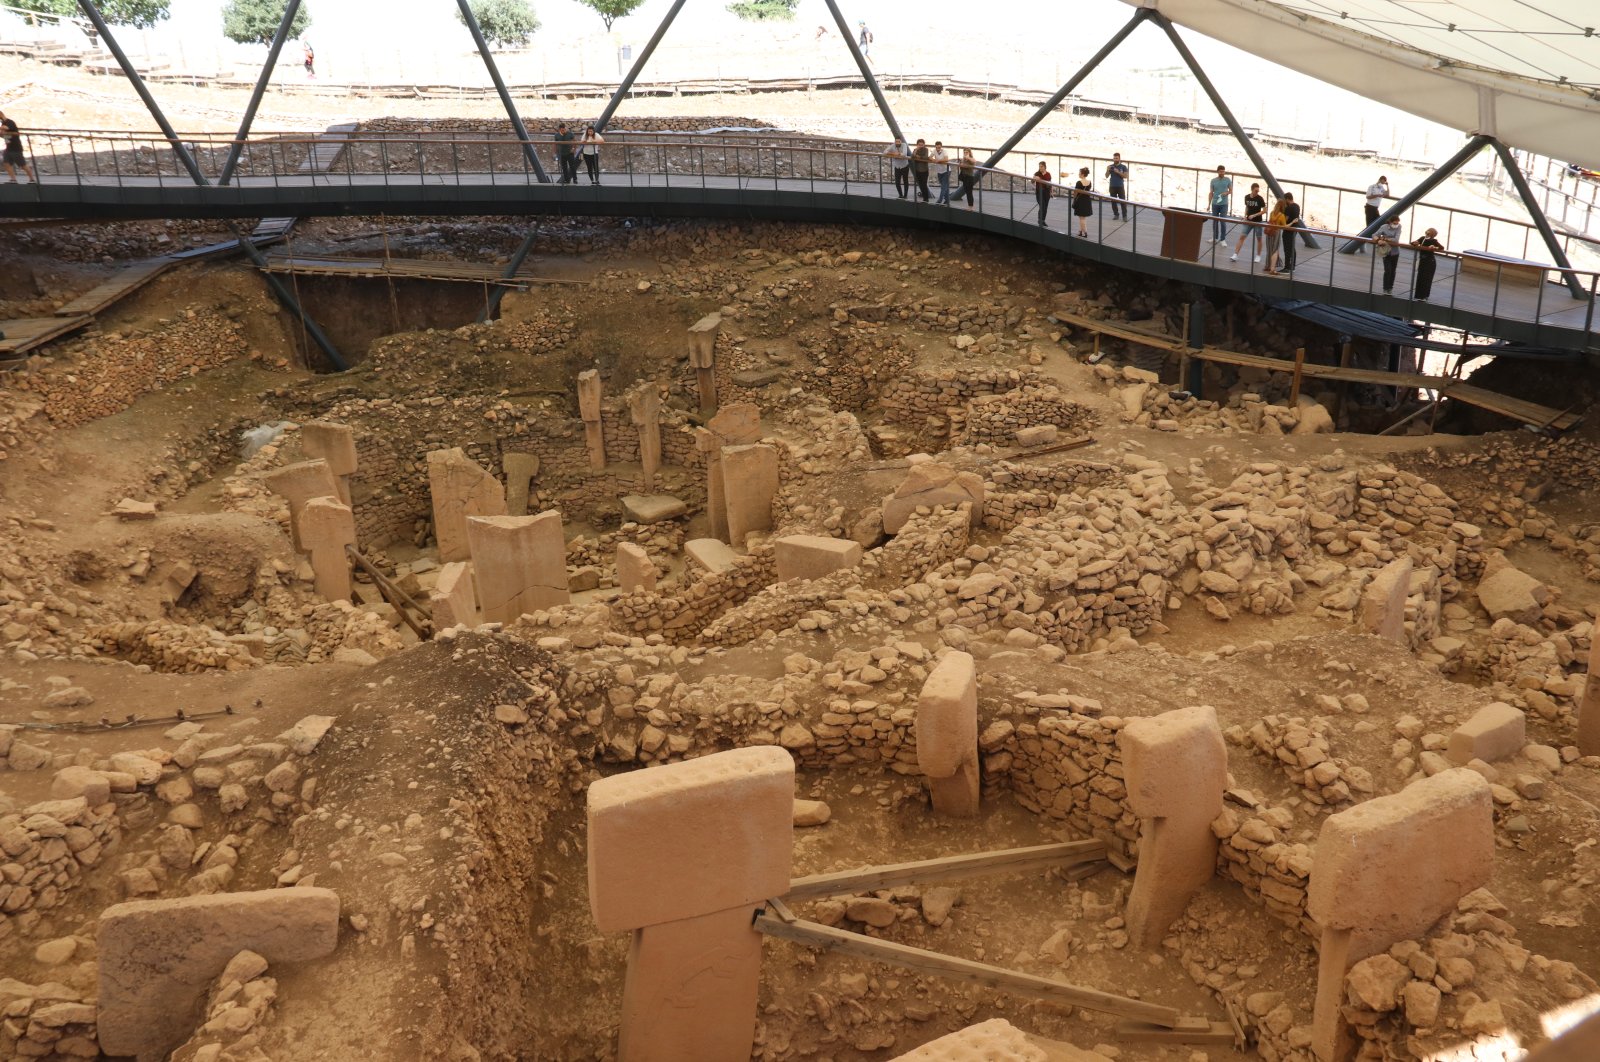 The ancient Göbeklitepe site was discovered in 1963 by researchers from the universities of Istanbul and Chicago. (AA PHOTO)